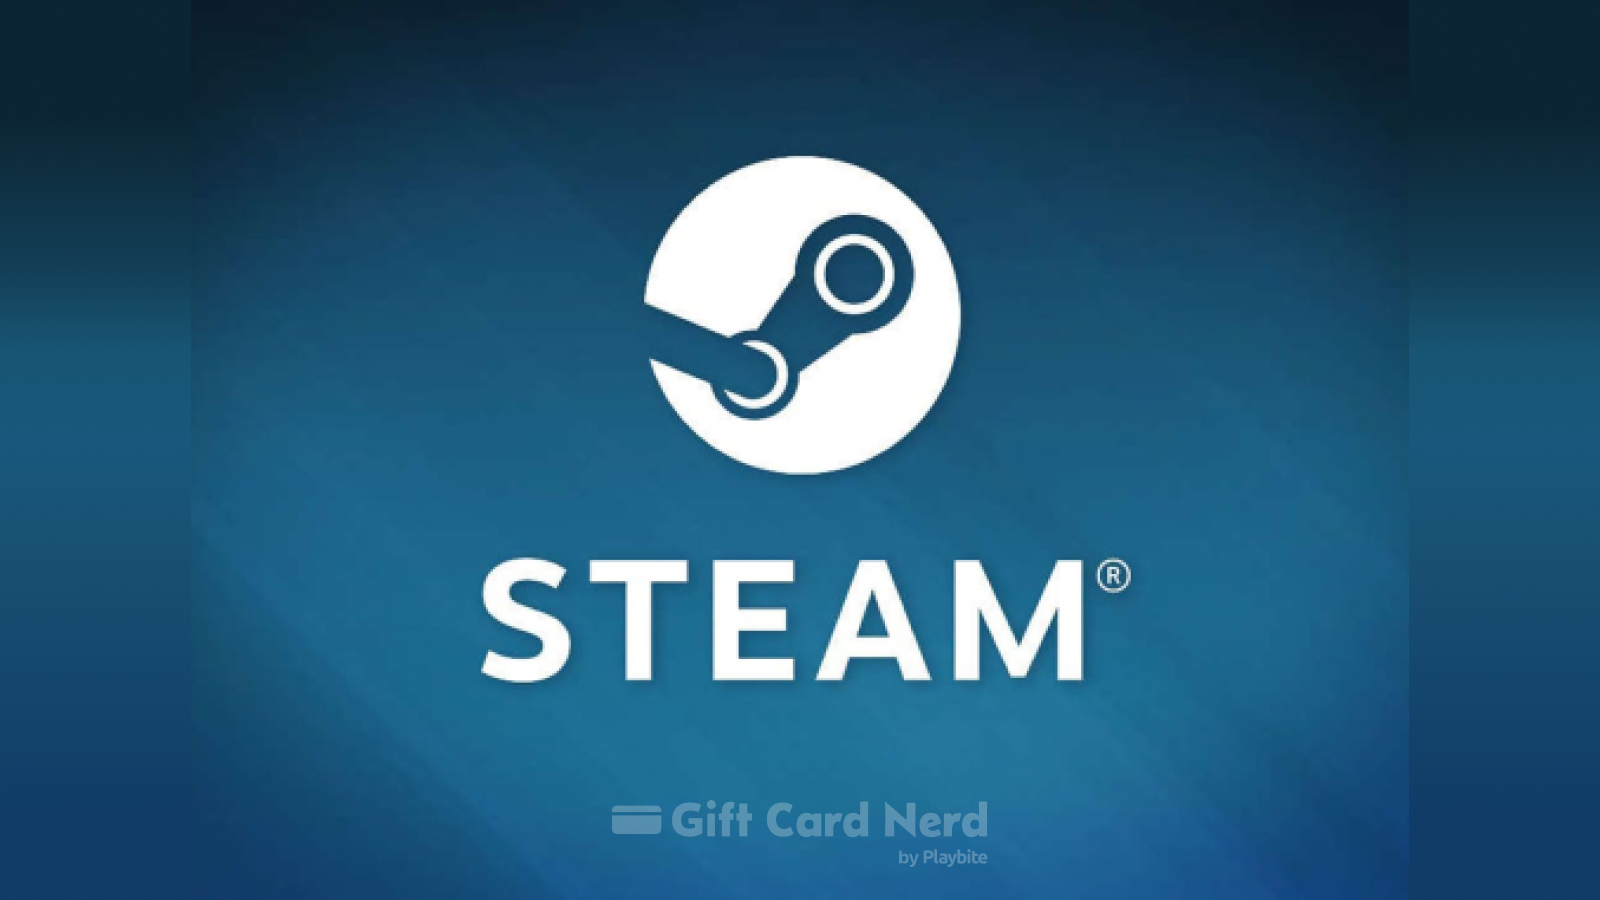 Can I use a Steam Gift Card on Postmates?